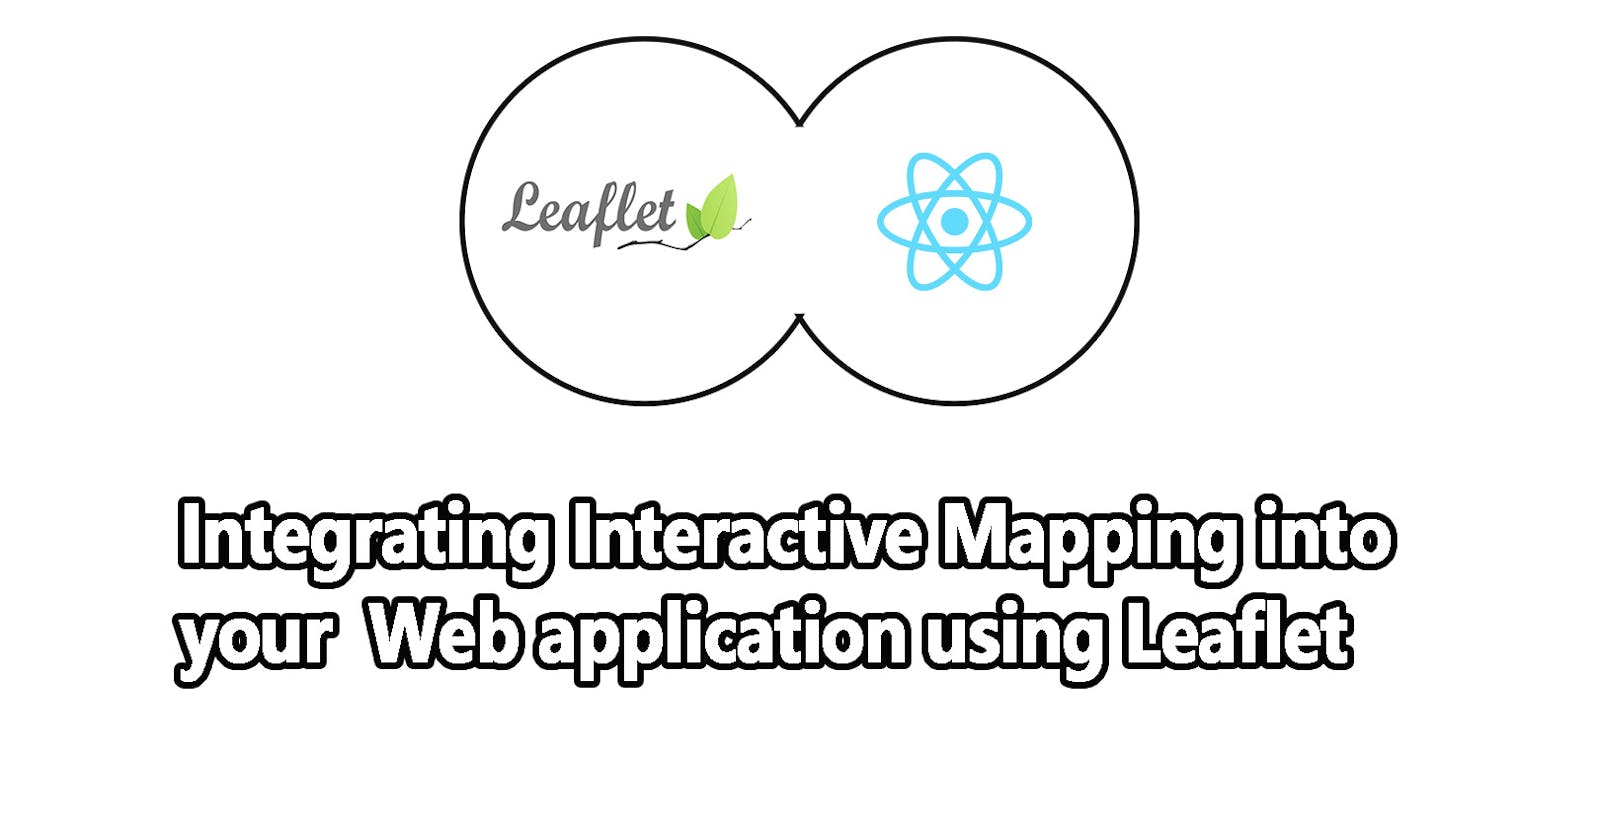 Integrating Interactive Mapping into your web application using Leaflet